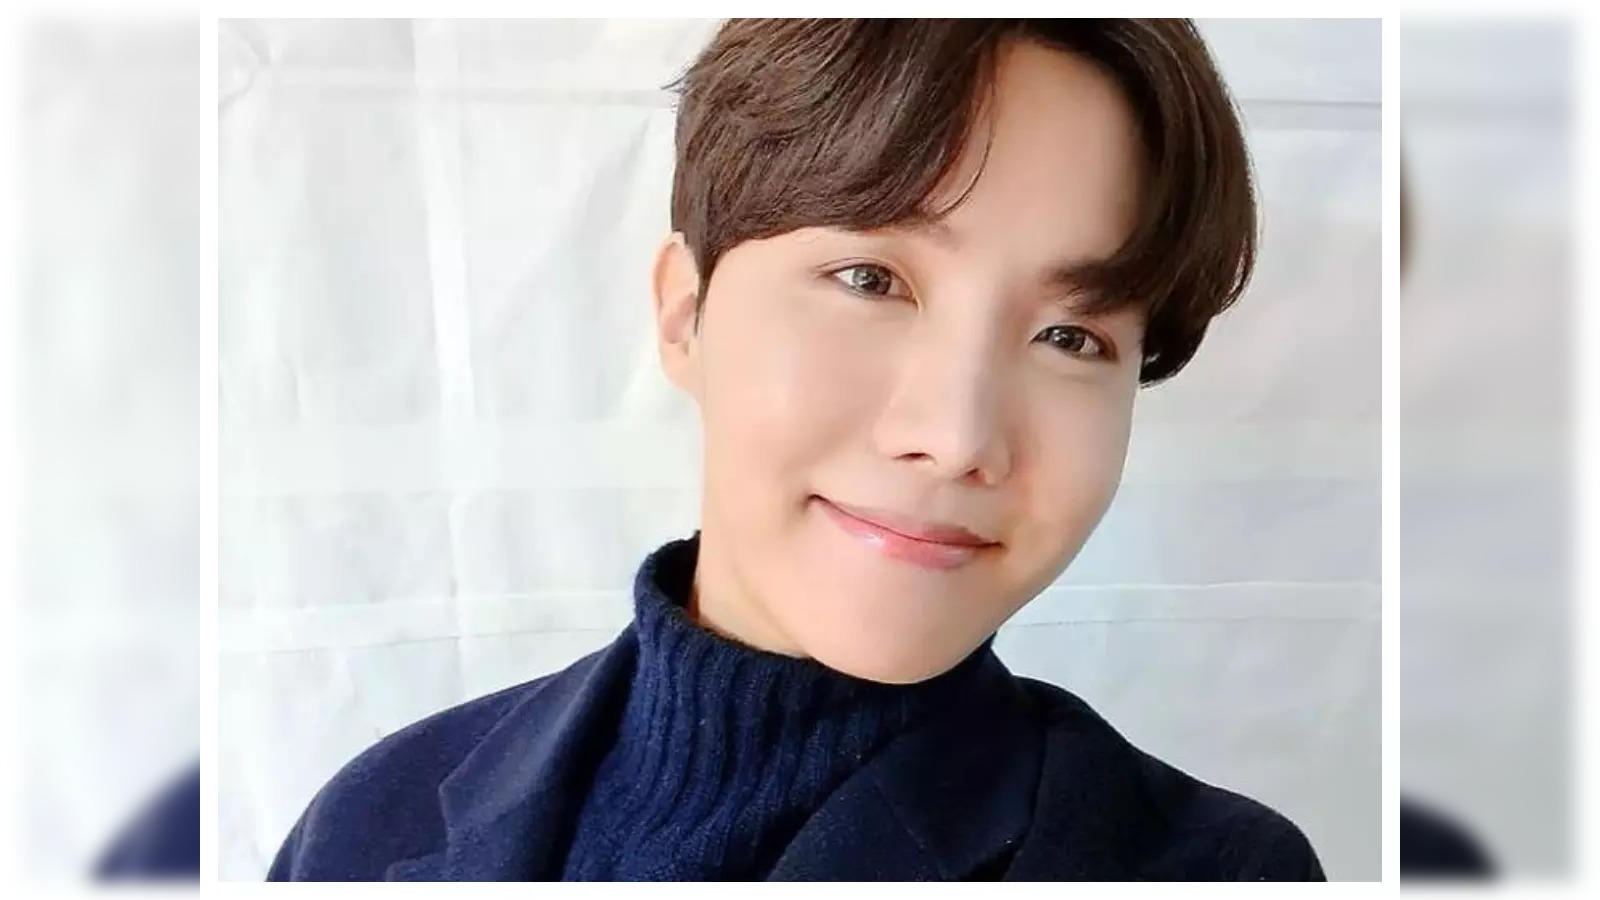 J-hope: BTS' J-hope first campaign for Louis Vuitton: All you need to